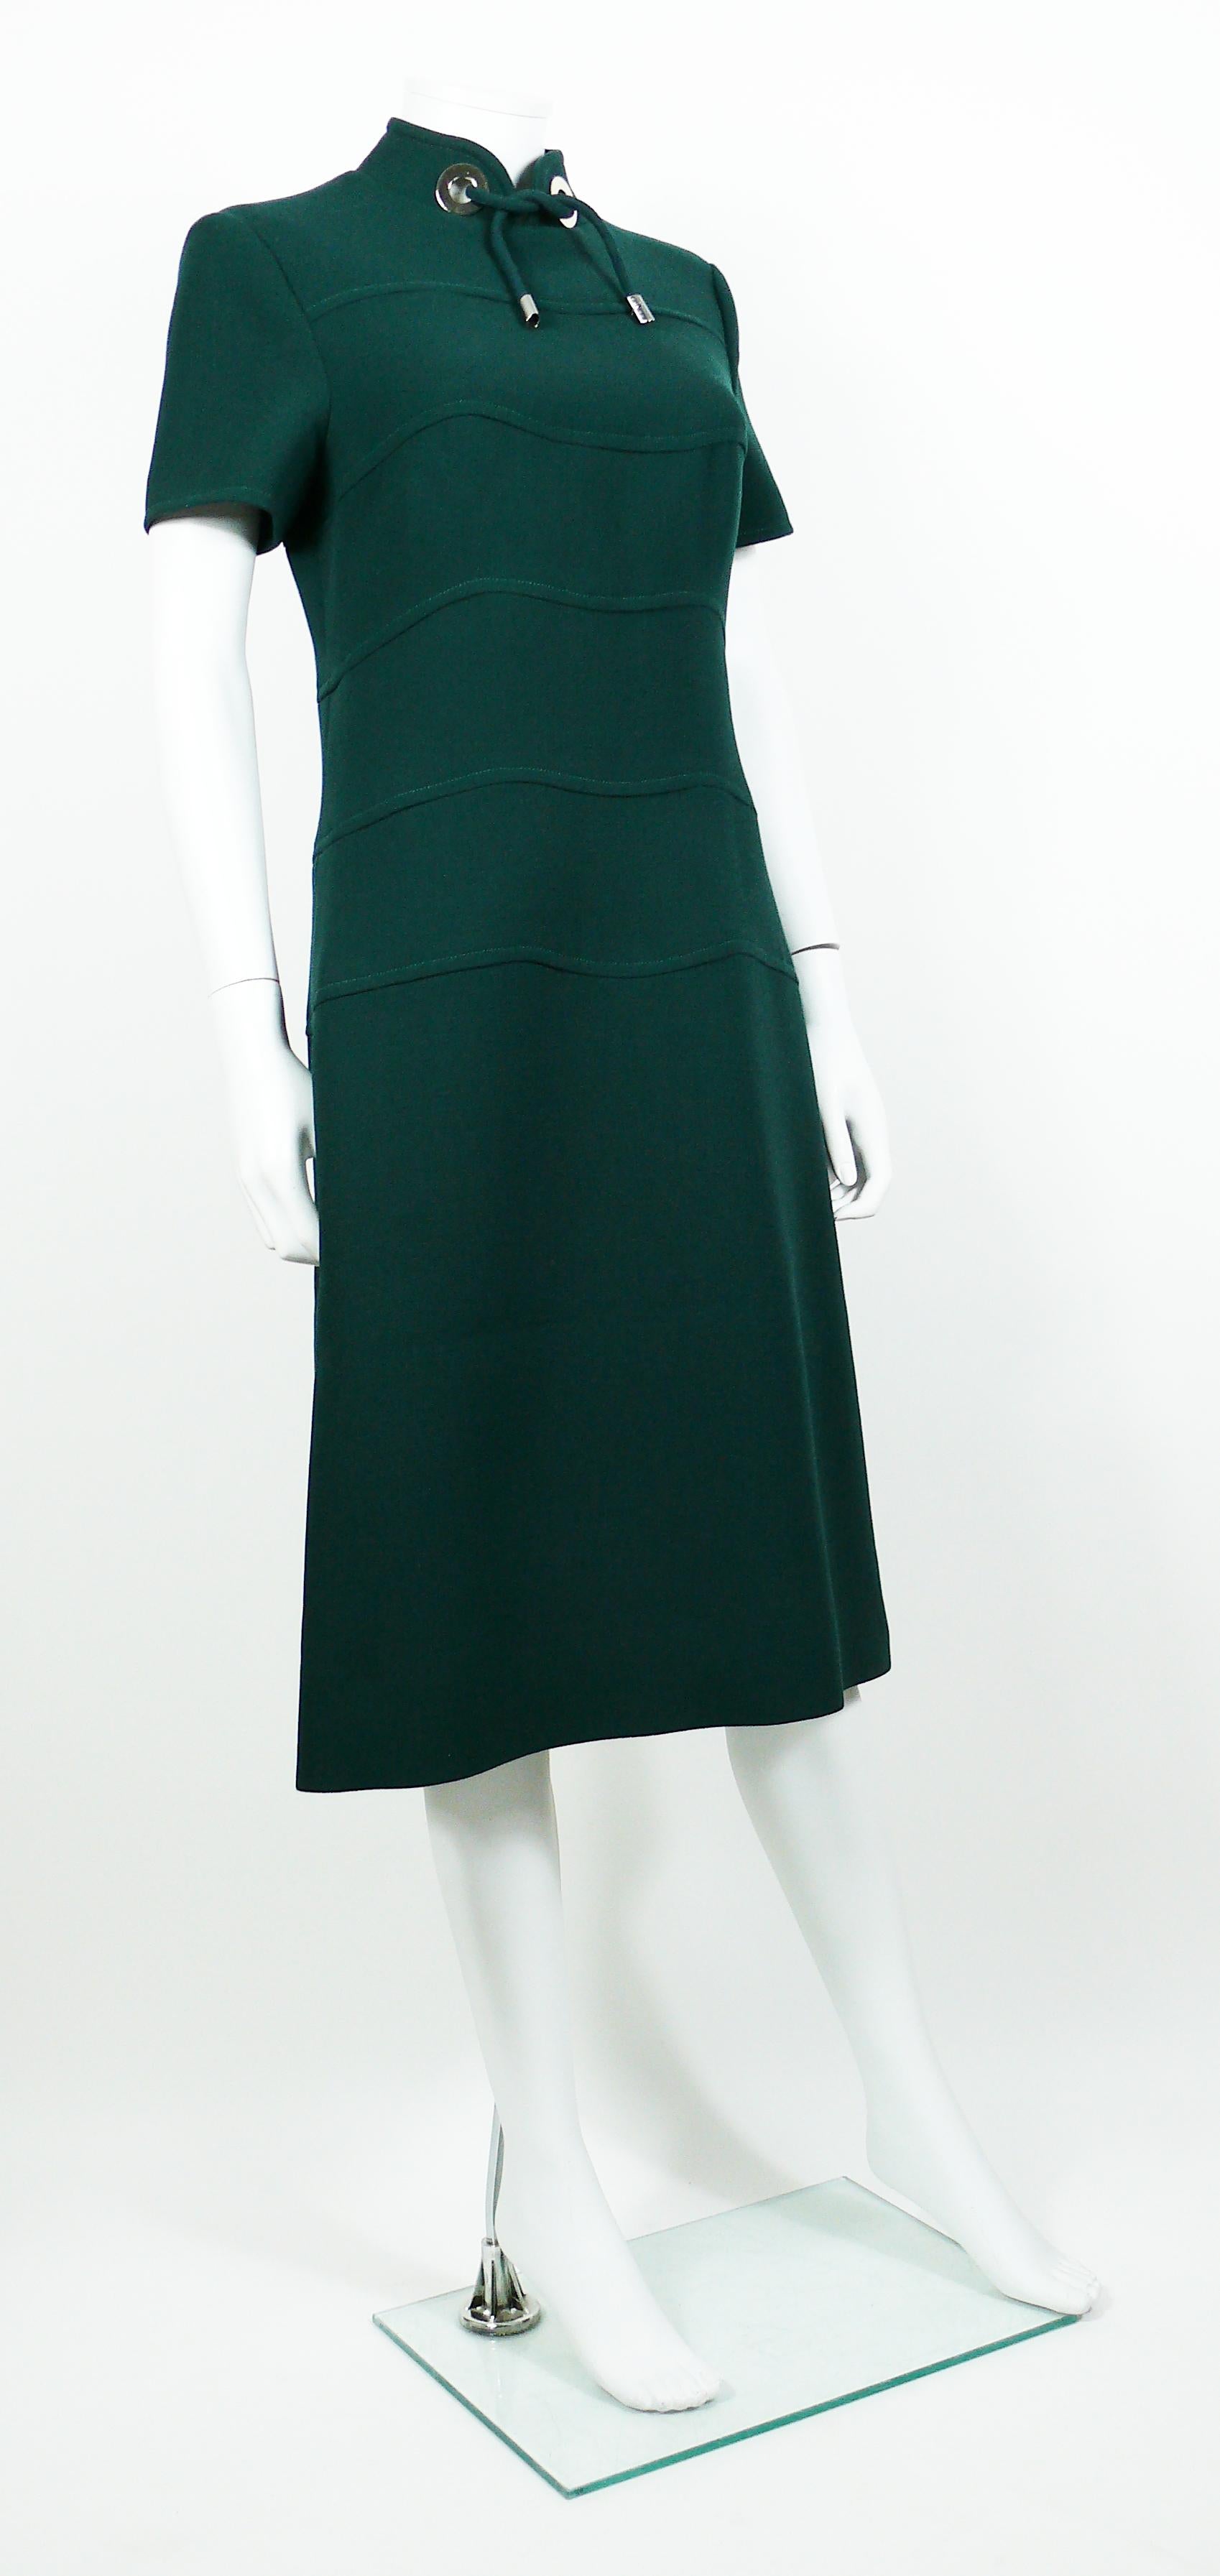 LOUIS FERAUD vintage green wool Space Age dress.

Fully lined.
Back zip closure.

Label reads LOUIS FERAUD at REMBRANDT.
Made in England.

Size tag reads : 14.
Please refer to measurements. 

Composition tag reads : Pure new wool.

Indicative